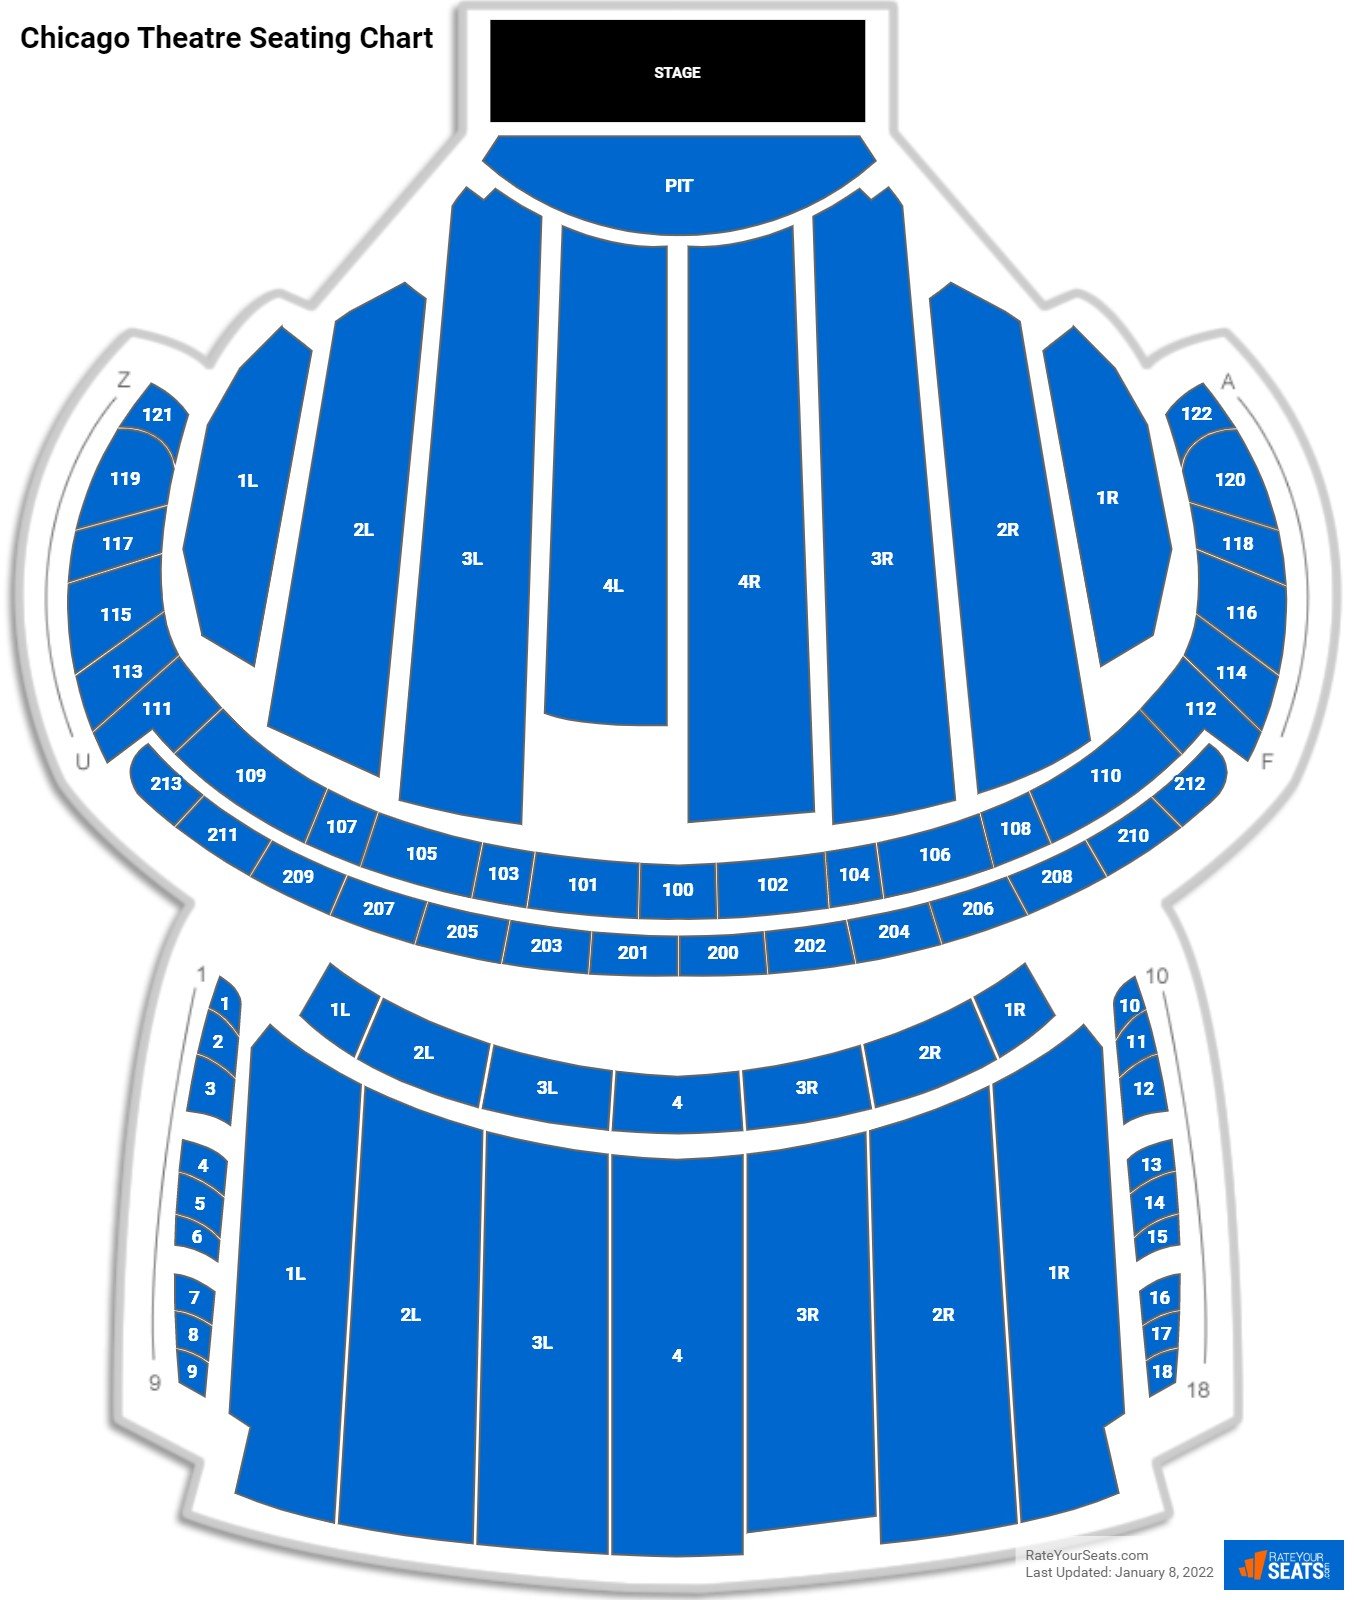 Chicago Theatre Concert Seating Chart